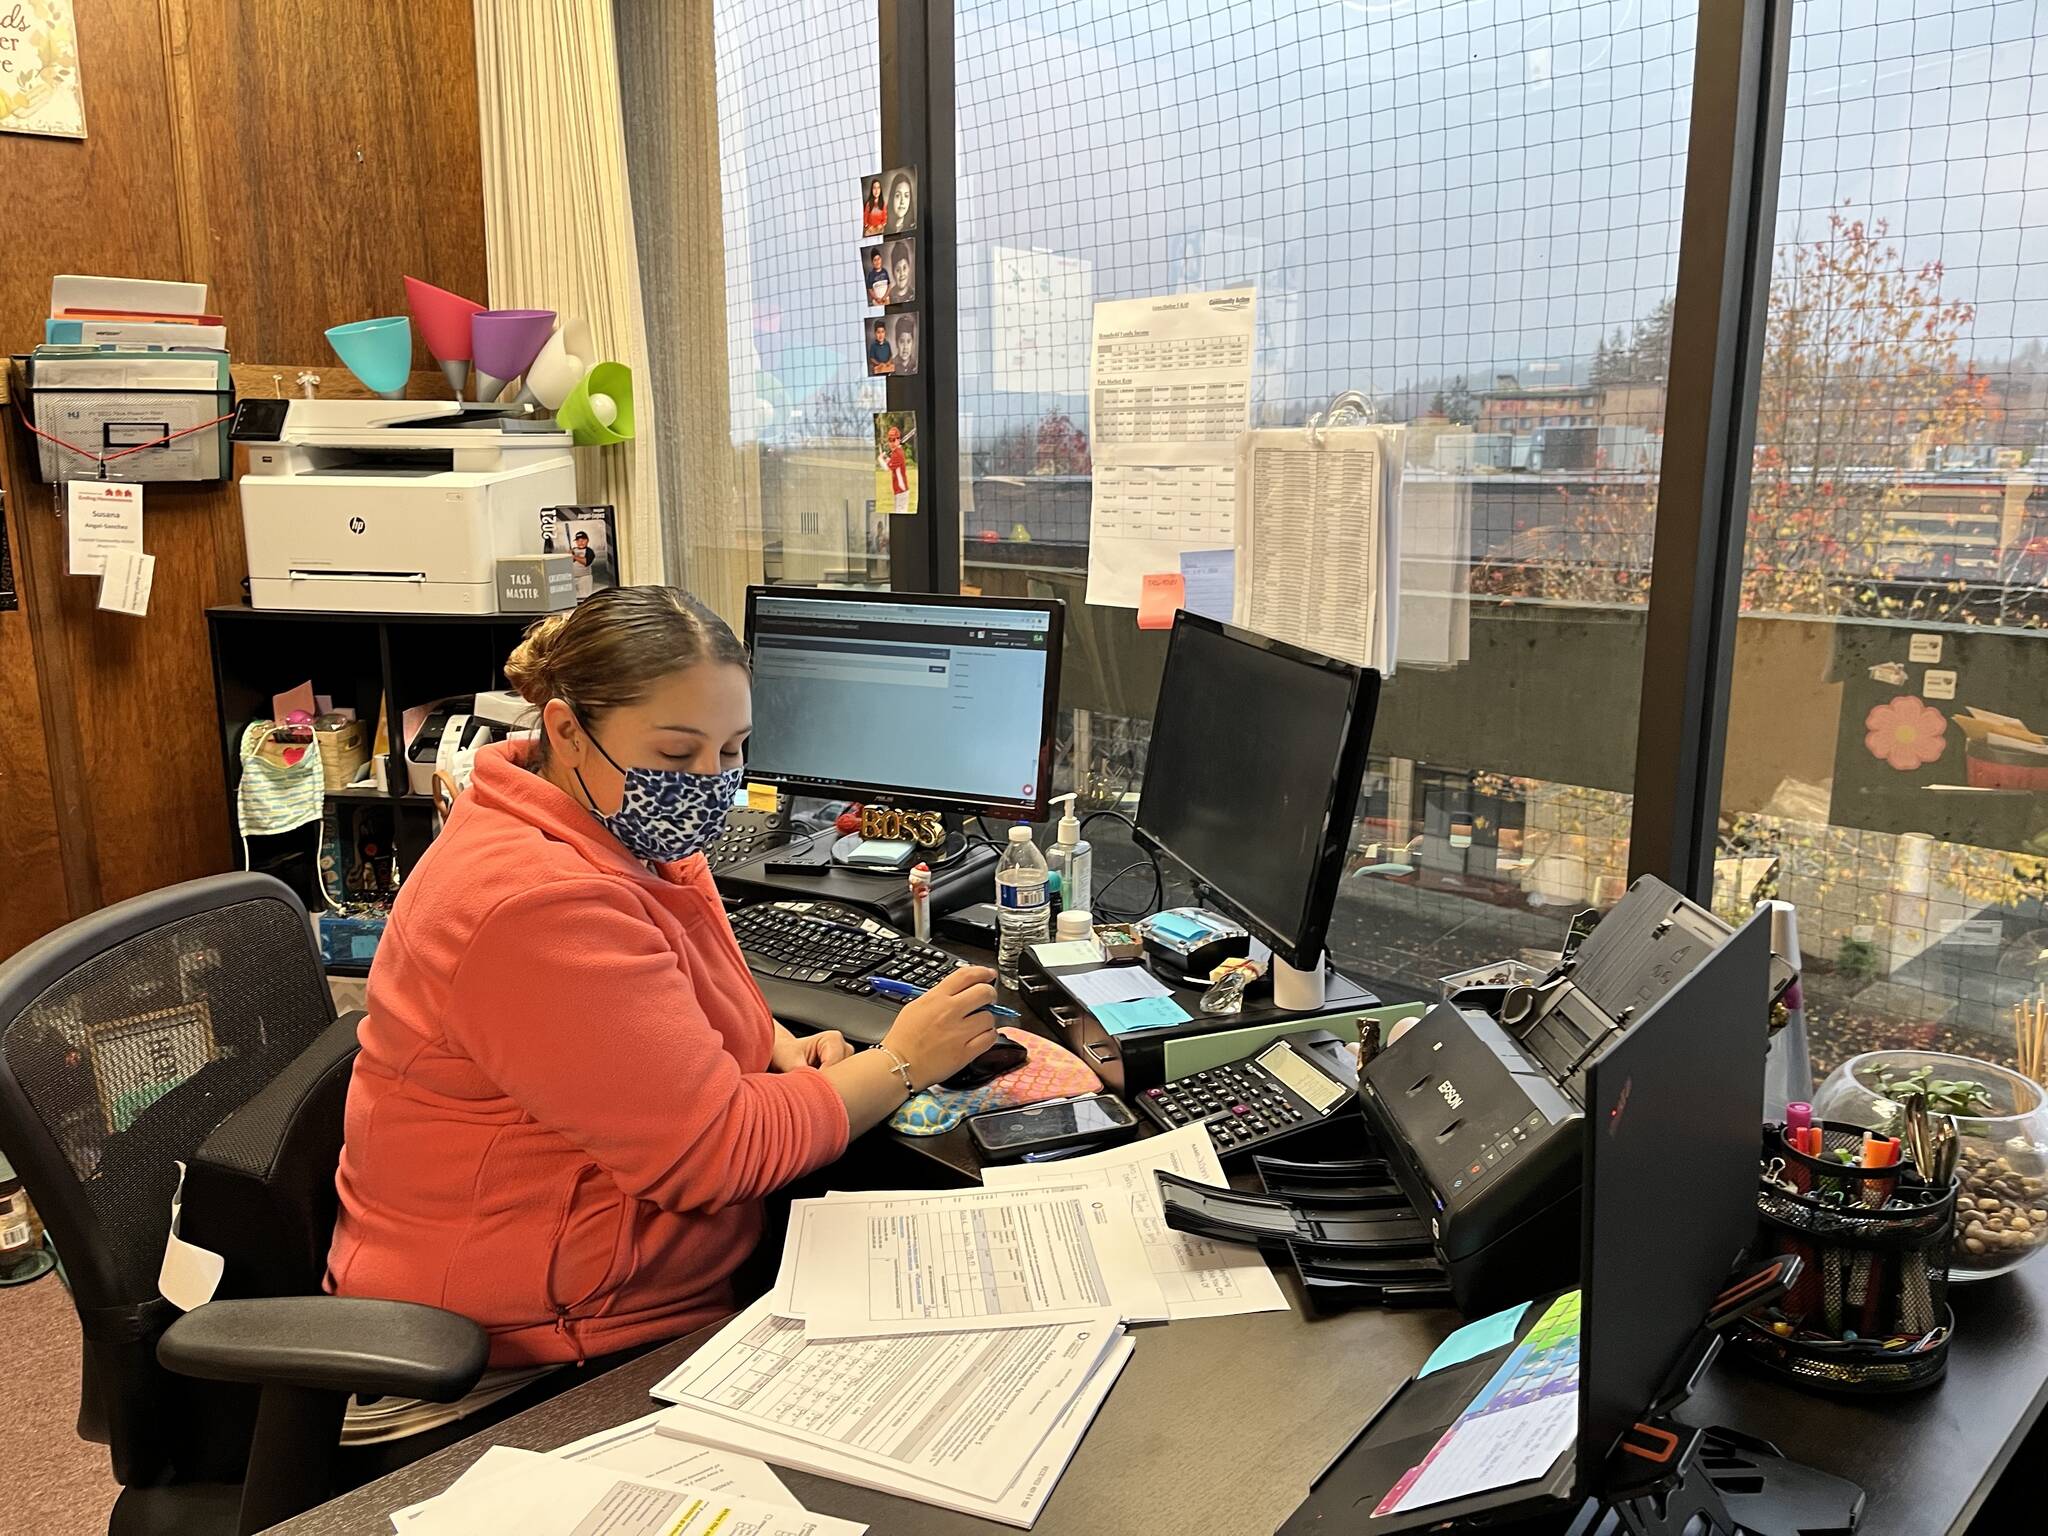 Susana Lopez, housing and community program manager at Coastal Community Action Program, is helping CCAP CEO Craig Dublanko in his efforts to get the word out to Grays Harbor County residents to call for an appointment if they are in need of rental and-or utility assistance.